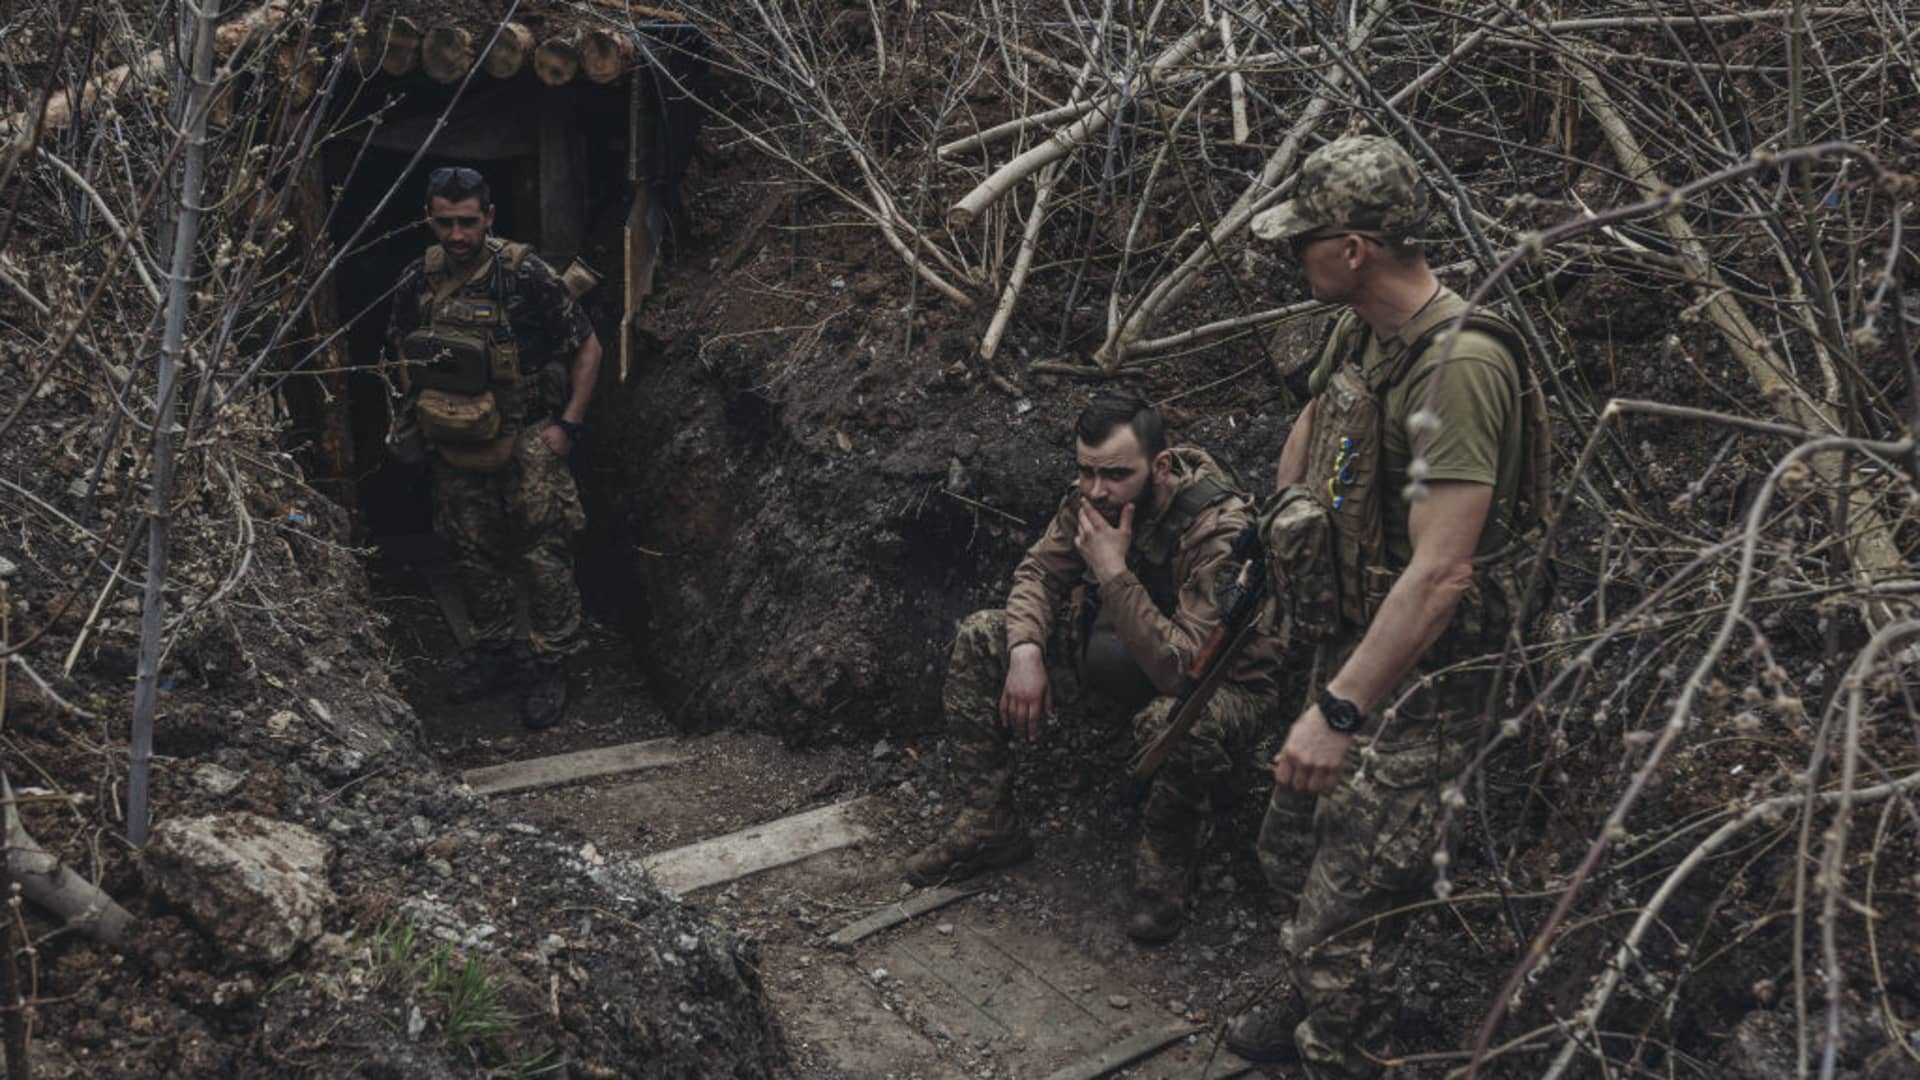 DONETSK OBLAST, UKRAINE - MARCH 26: Ukrainian soldiers of the 80th brigade in a trench in the direction of Bakhmut, 26 March 2023 (Photo by Diego Herrera Carcedo/Anadolu Agency via Getty Images)